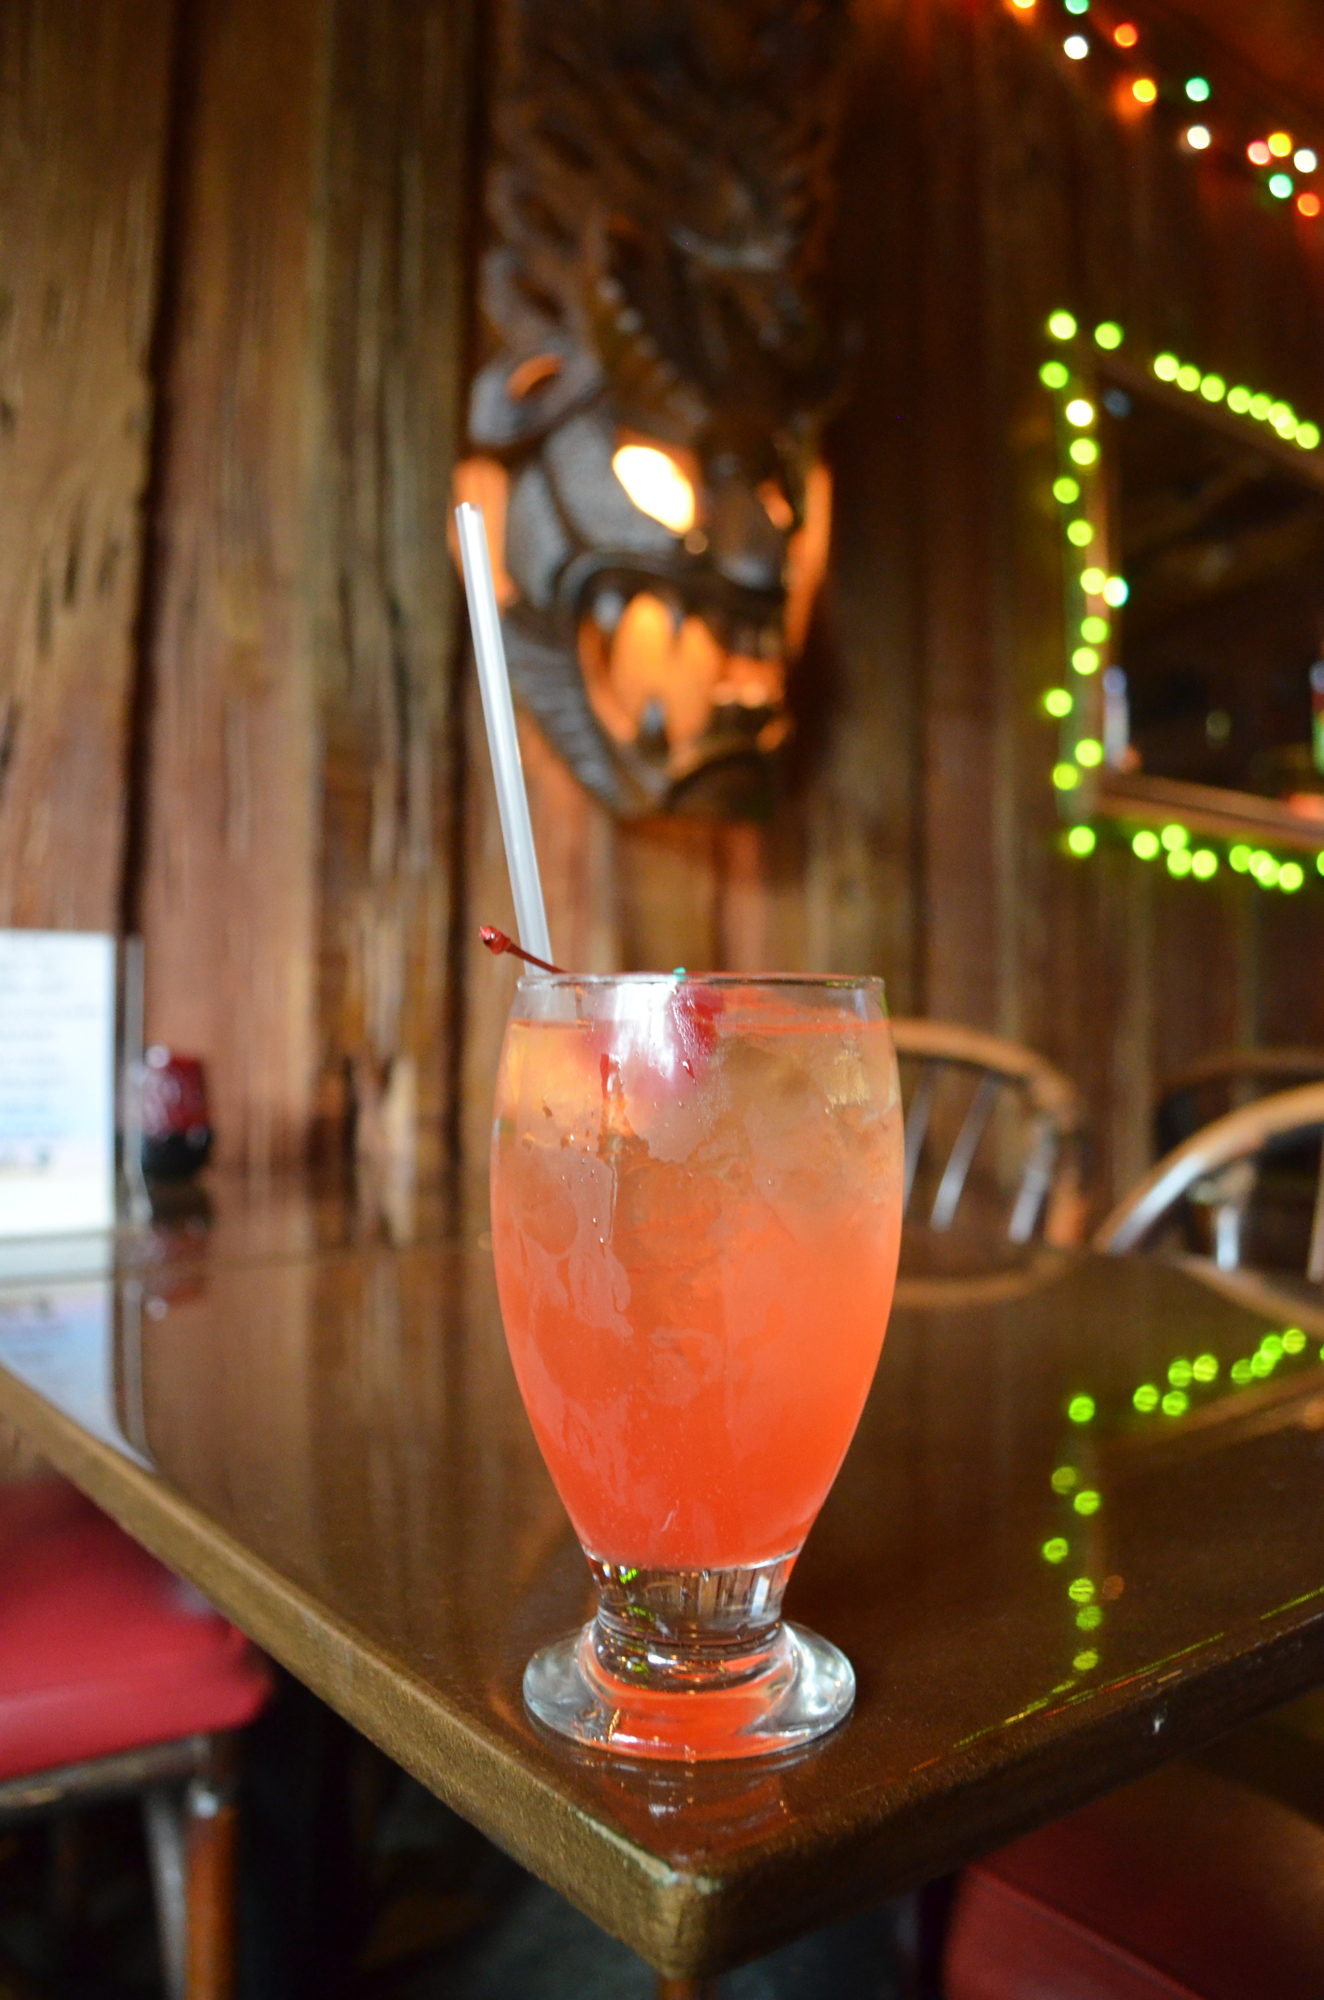 The Bahi Hut is known for its especially potent, limit two, Mai Tai.